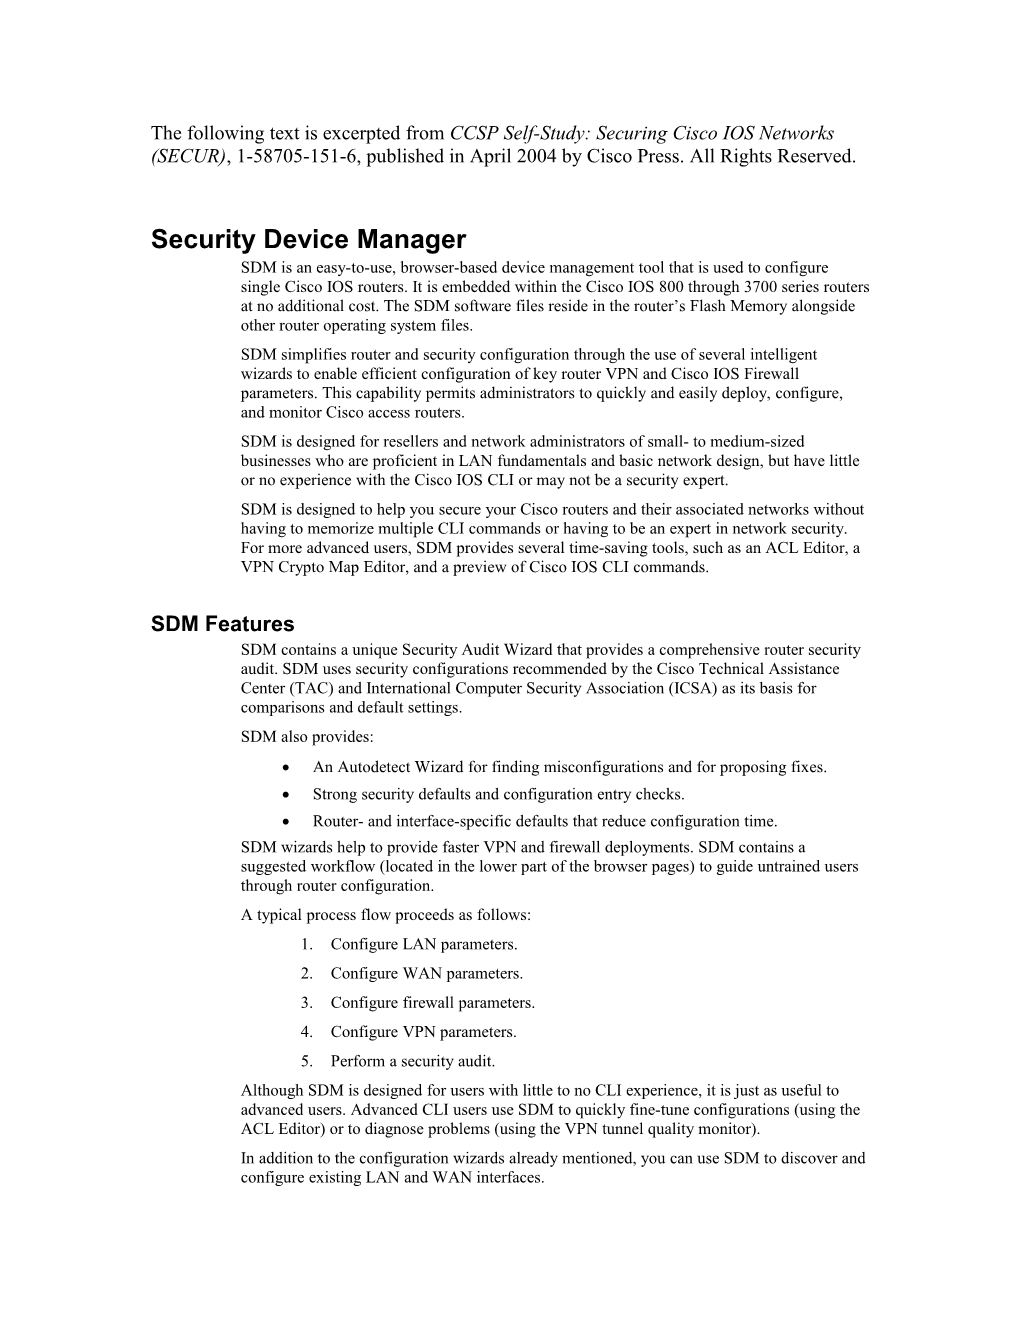 Security Device Manager